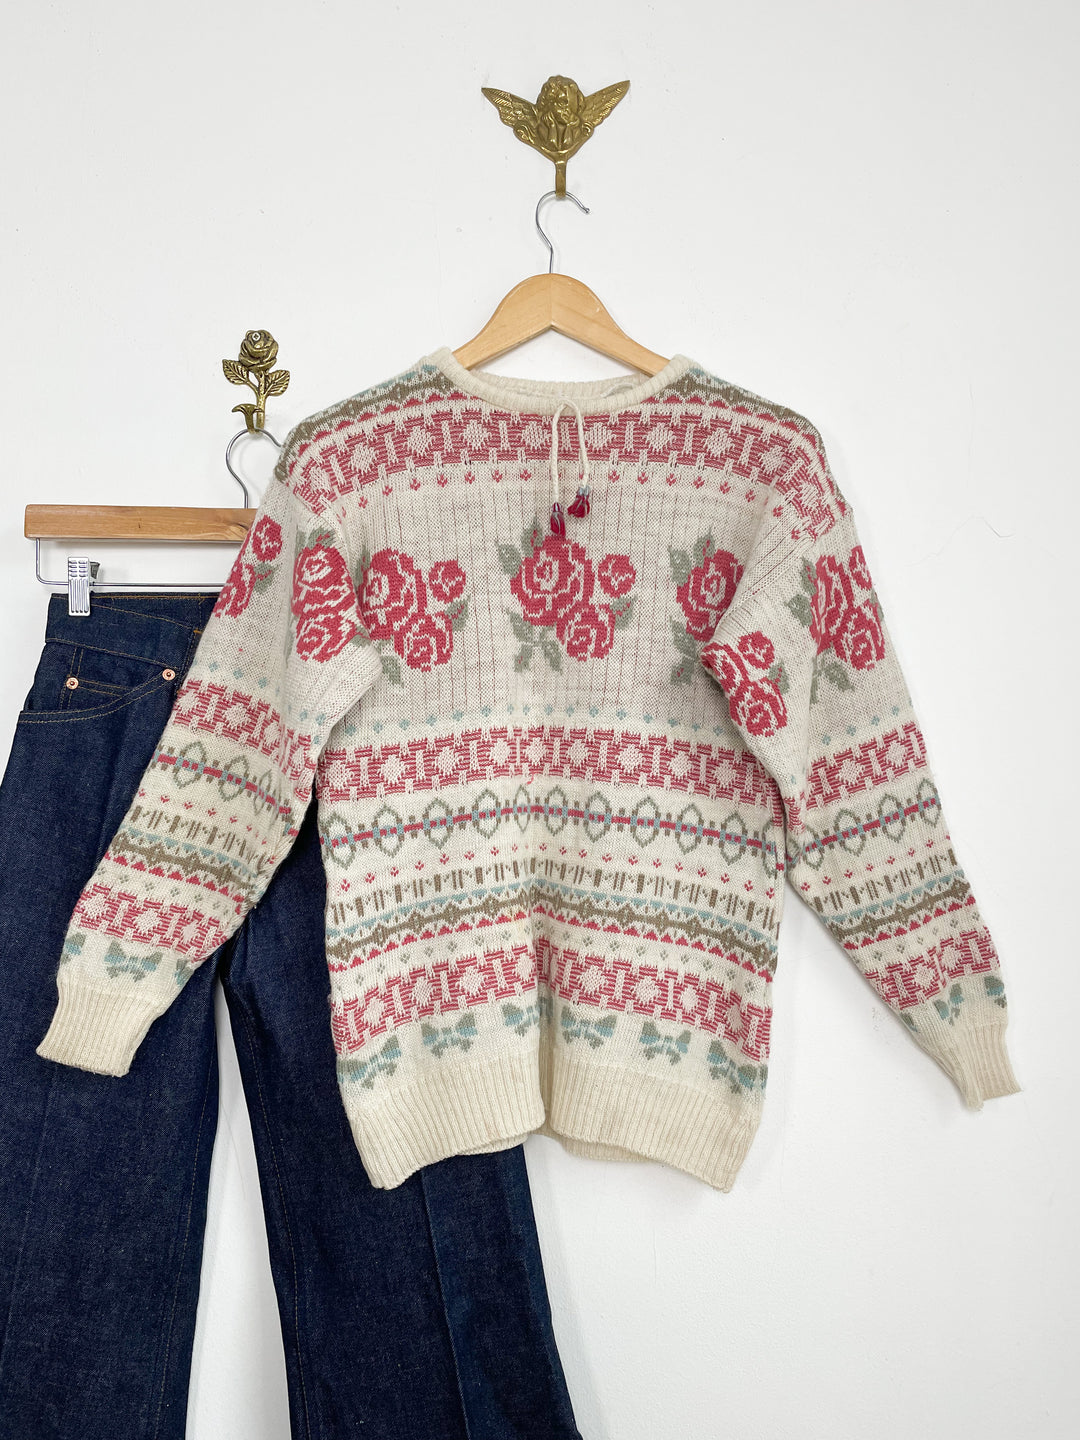 The Charm Knit Sweater